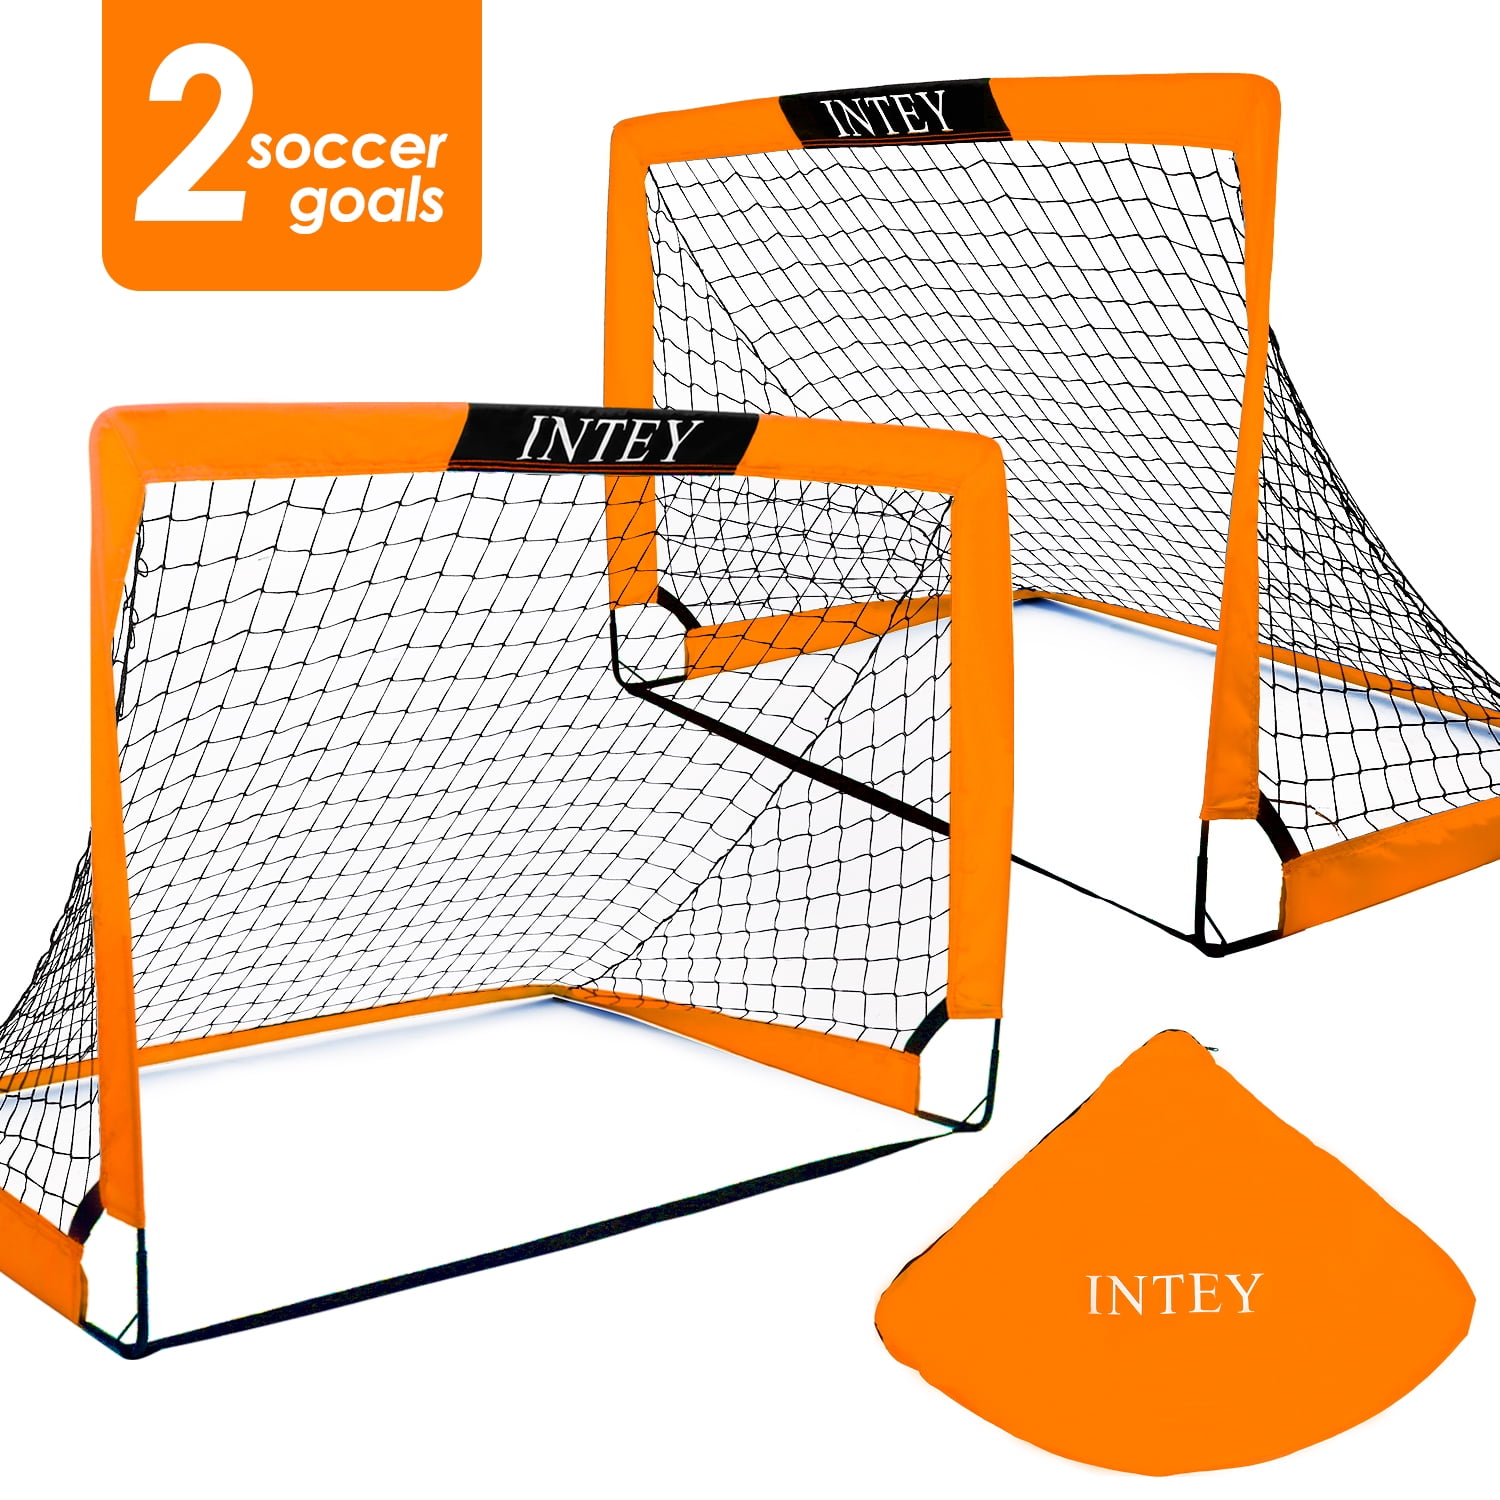 INTEY Portable Soccer Goals,Folding Soccer Nets for Backyard Training for Kids and Teens,Set of 2 with Carry Bag, 4x3ft - Walmart.com